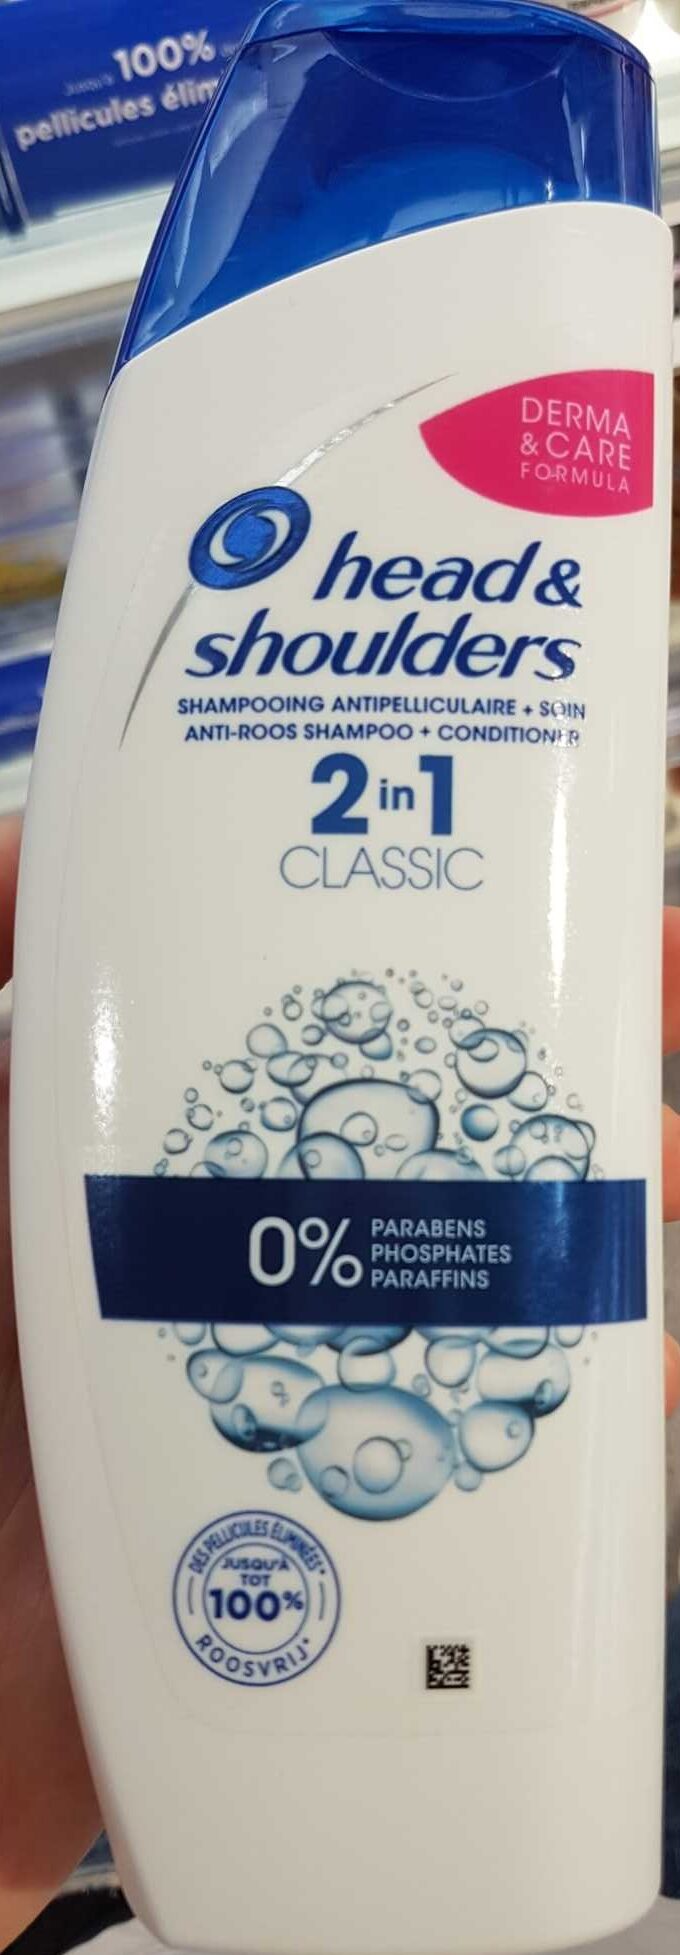 Head & Shoulders 2 in 1 Classic (Derma & Care Formula) - Product - fr